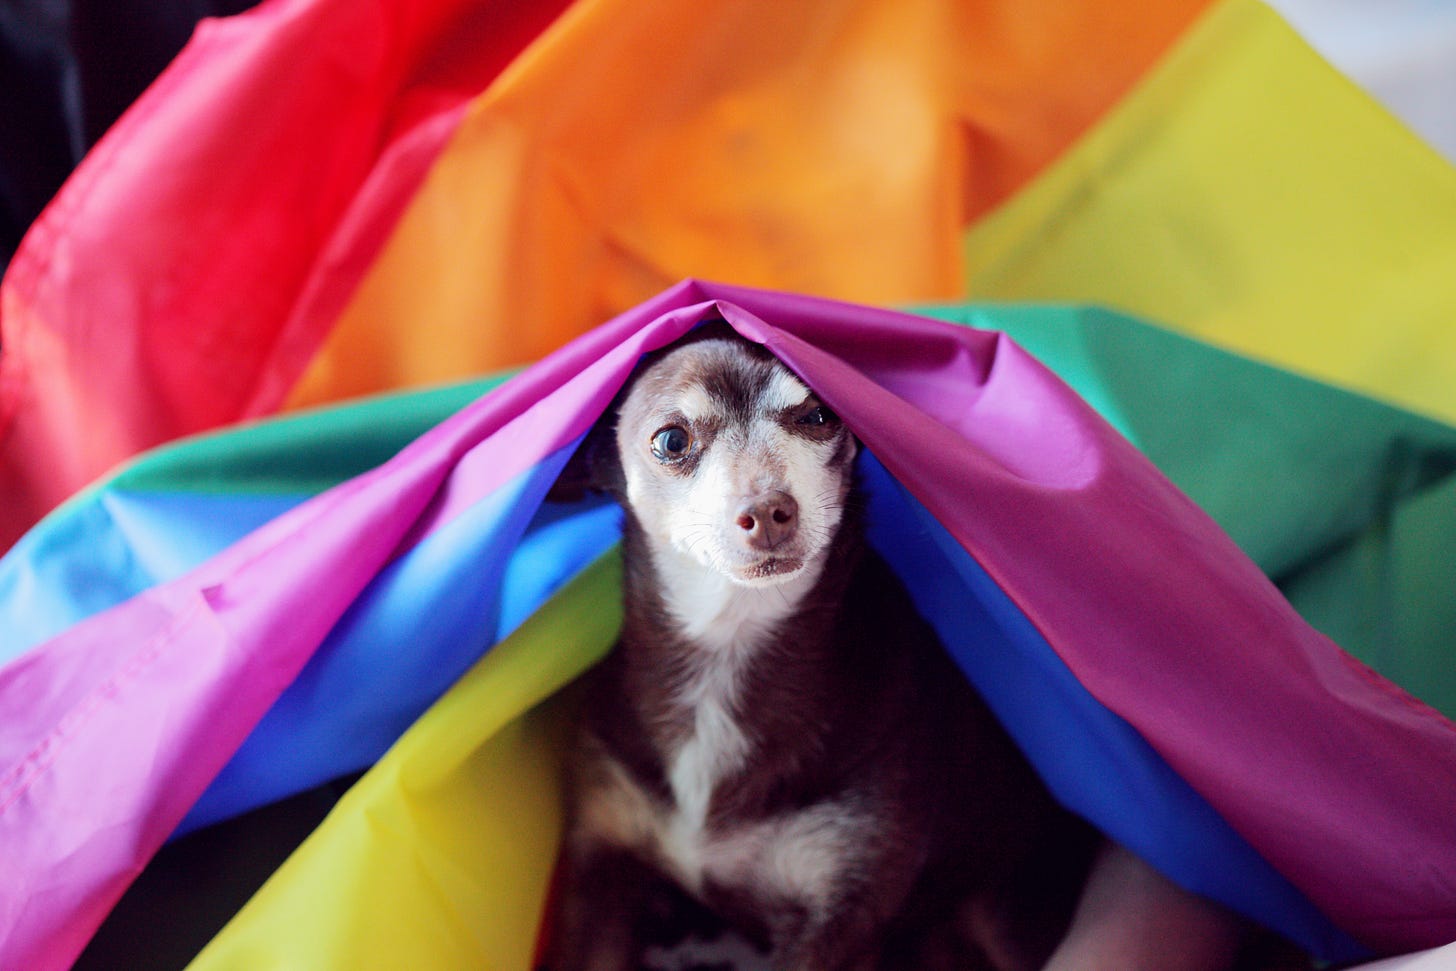 A small brown dog with a cream-colored face and eyebrows nestled inside a Pride flag